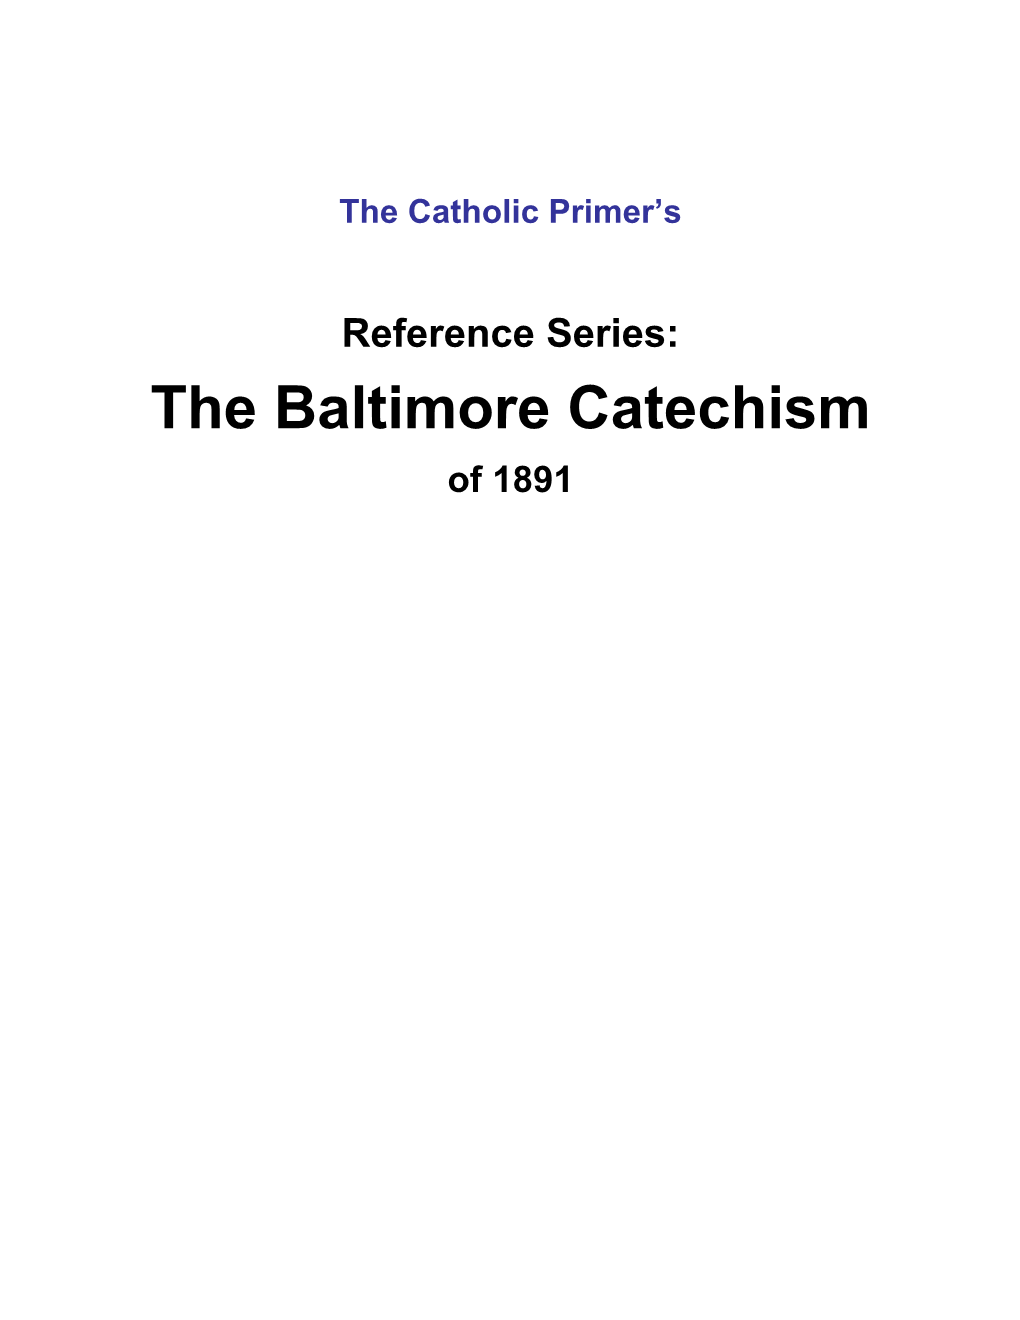 The Baltimore Catechism